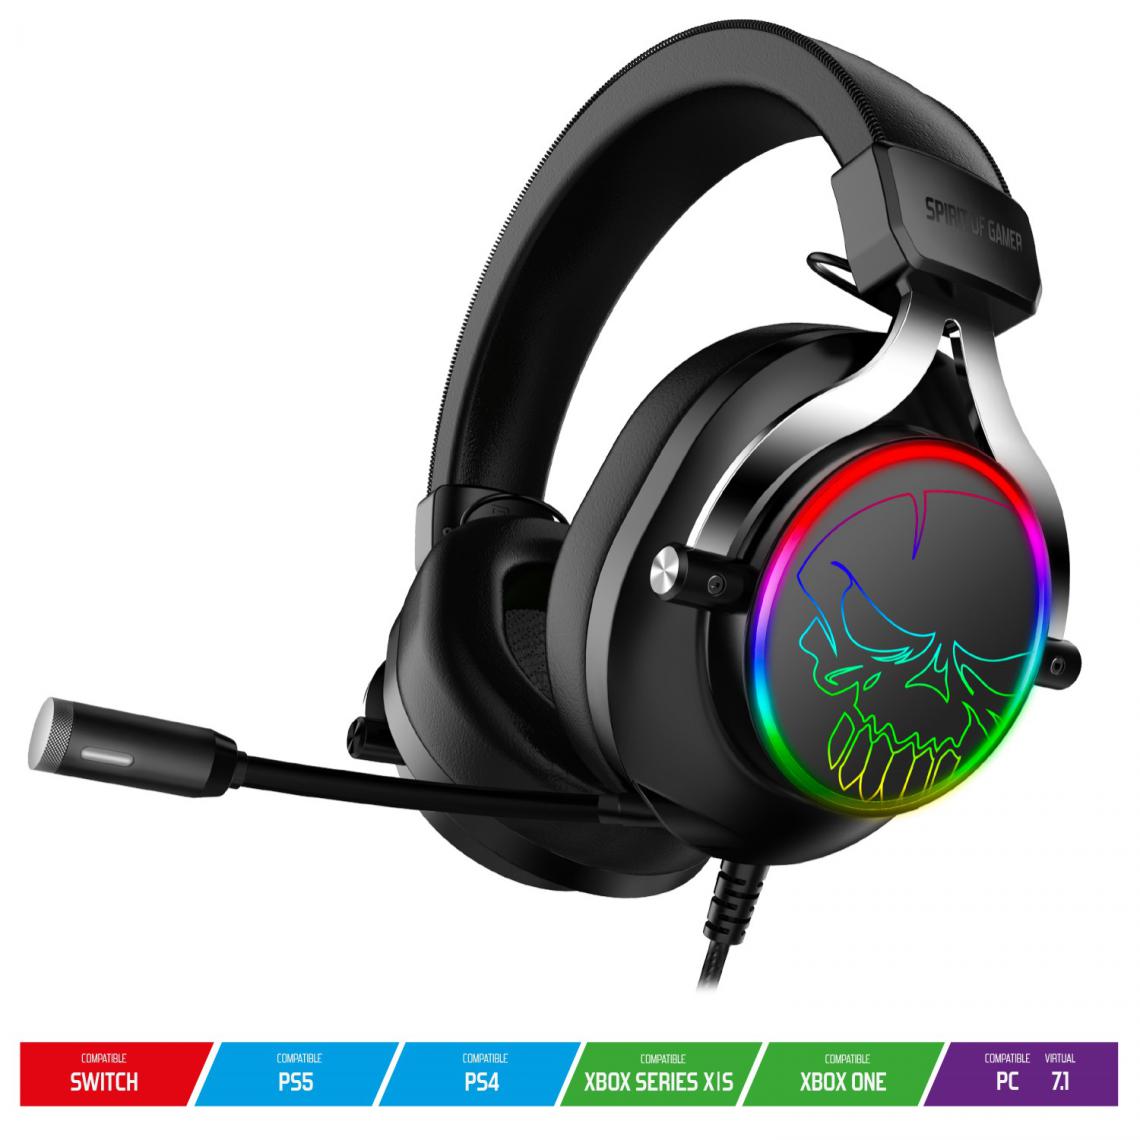 Spirit Of Gamers - Casque audio gamer RGB XPERT H600 7.1 Virtuel compatible PC, Switch, PS5 / PS4, XBOX SERIES X|S / XBOX ONE - Casque